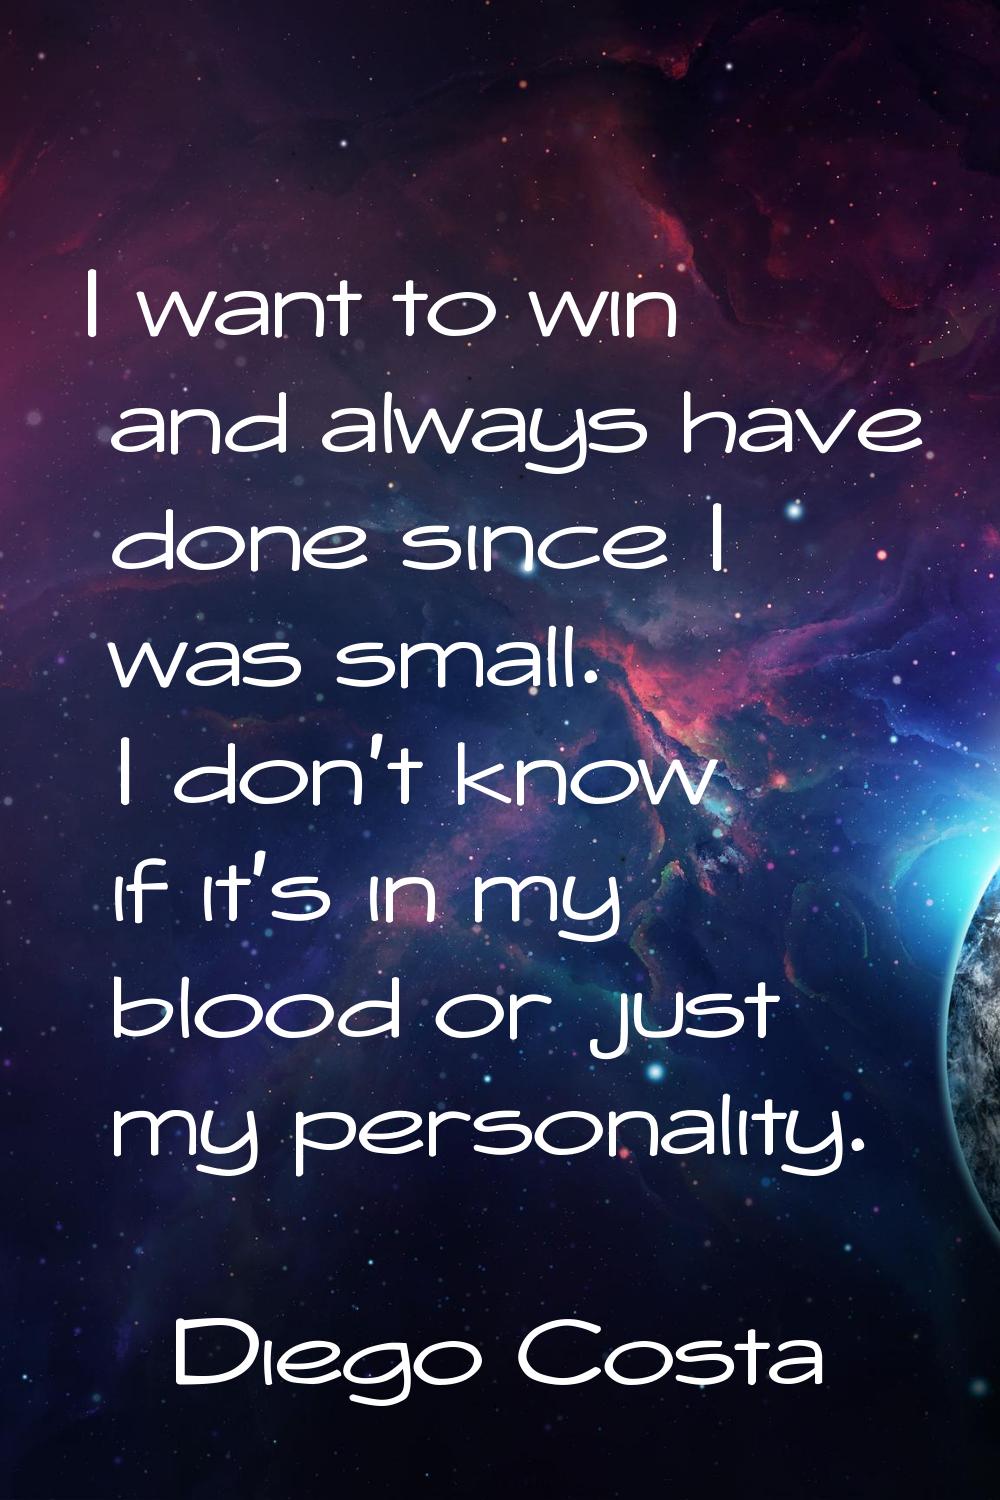 I want to win and always have done since I was small. I don't know if it's in my blood or just my p